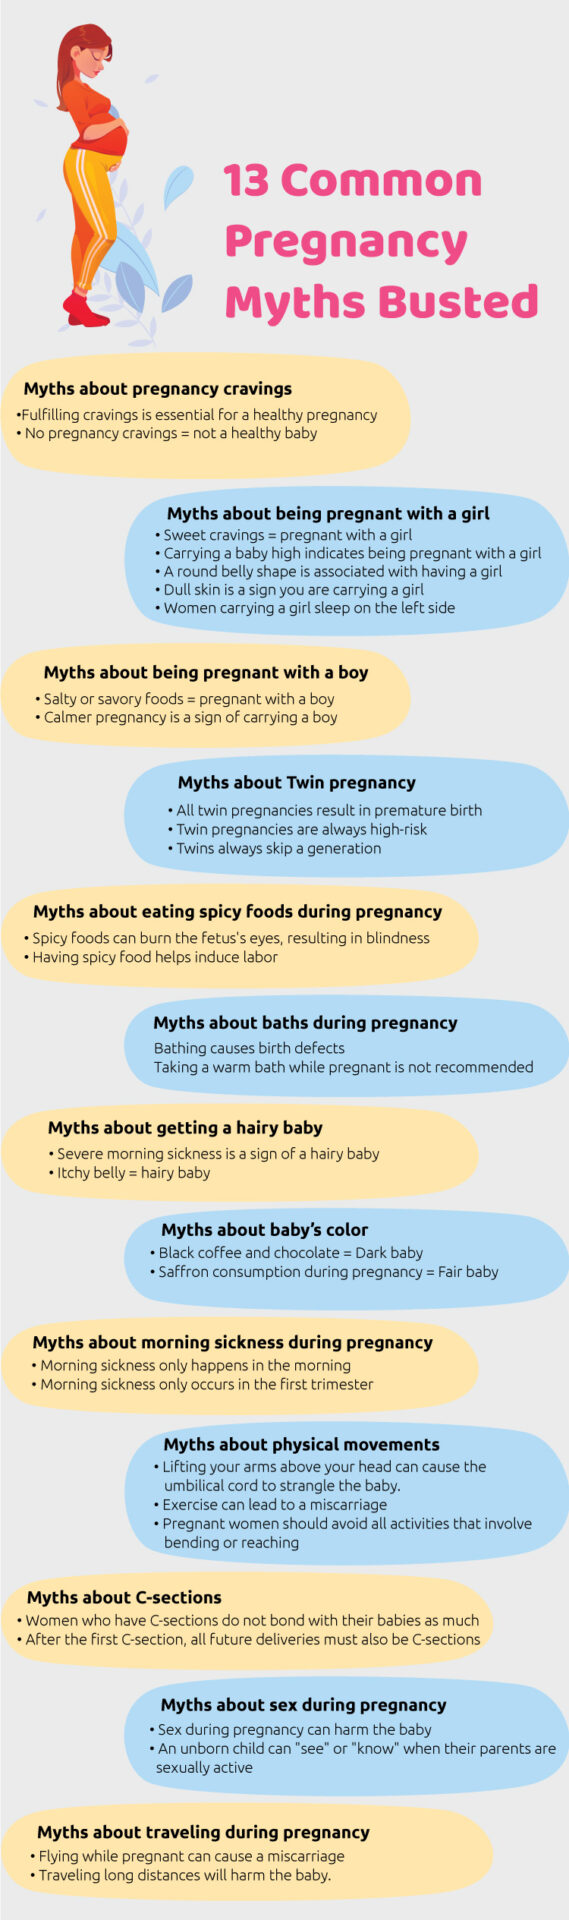 Infographic on pregnancy myths and facts